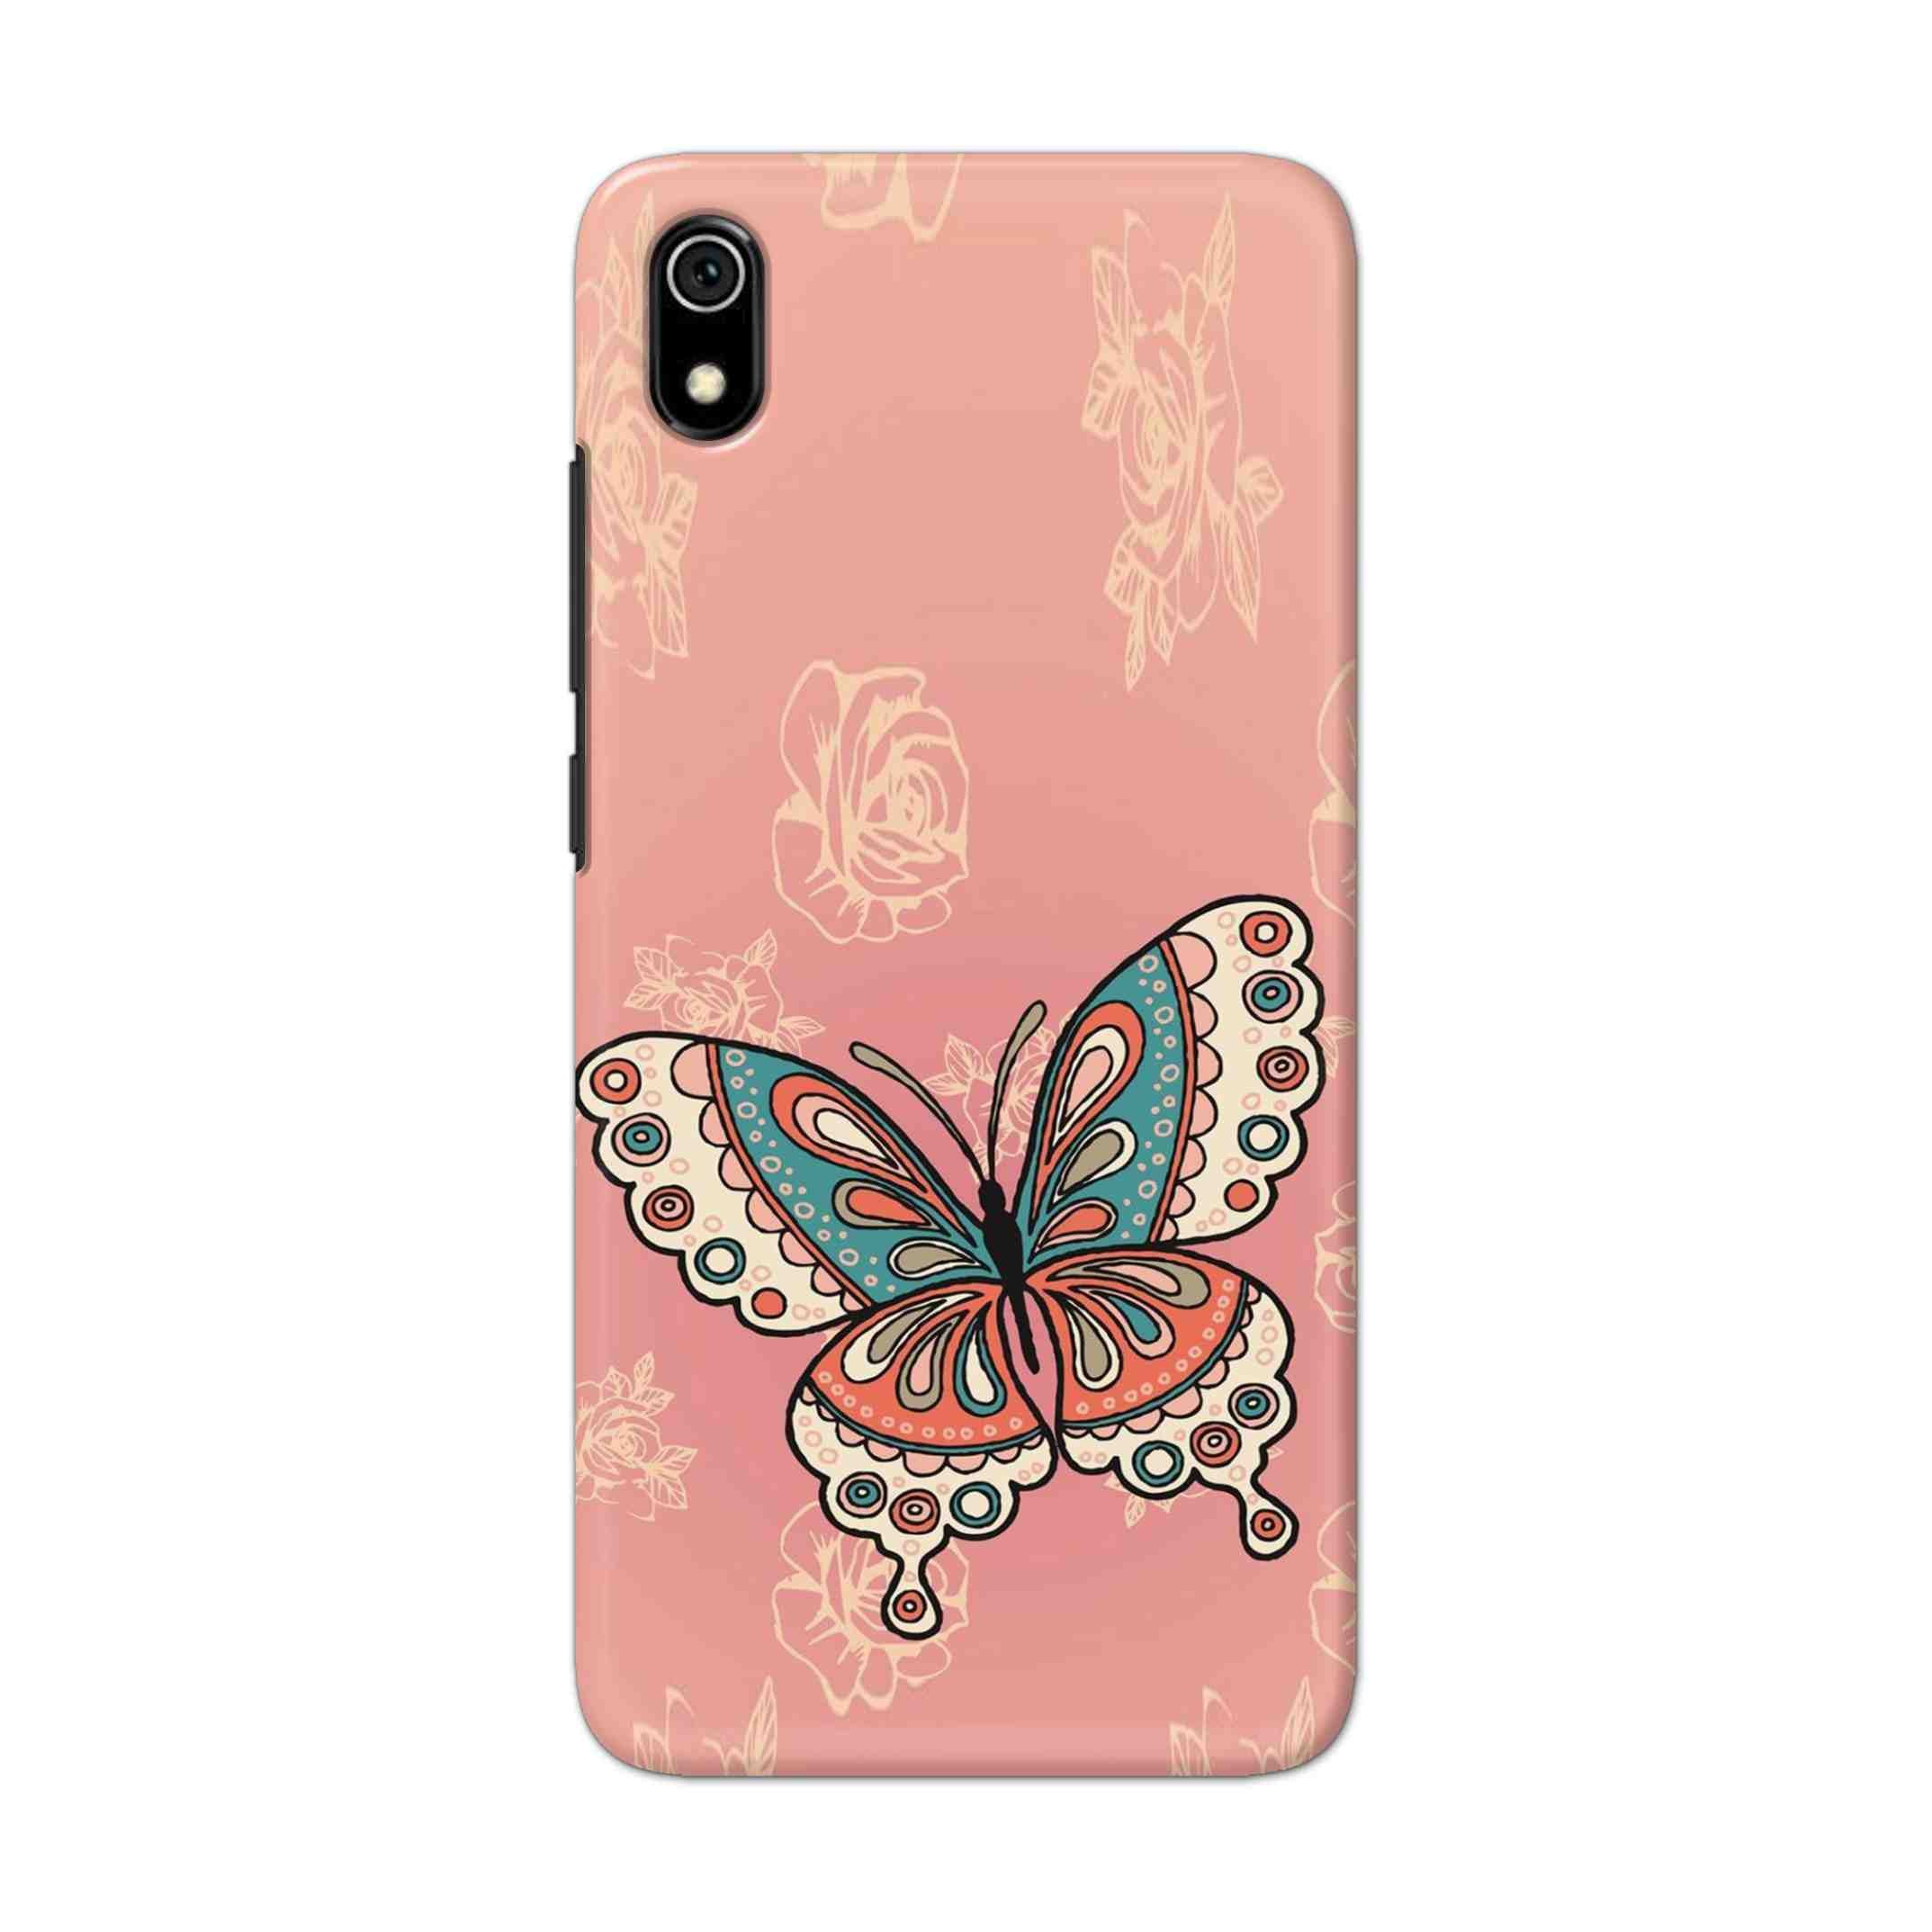 Buy Butterfly Hard Back Mobile Phone Case Cover For Xiaomi Redmi 7A Online